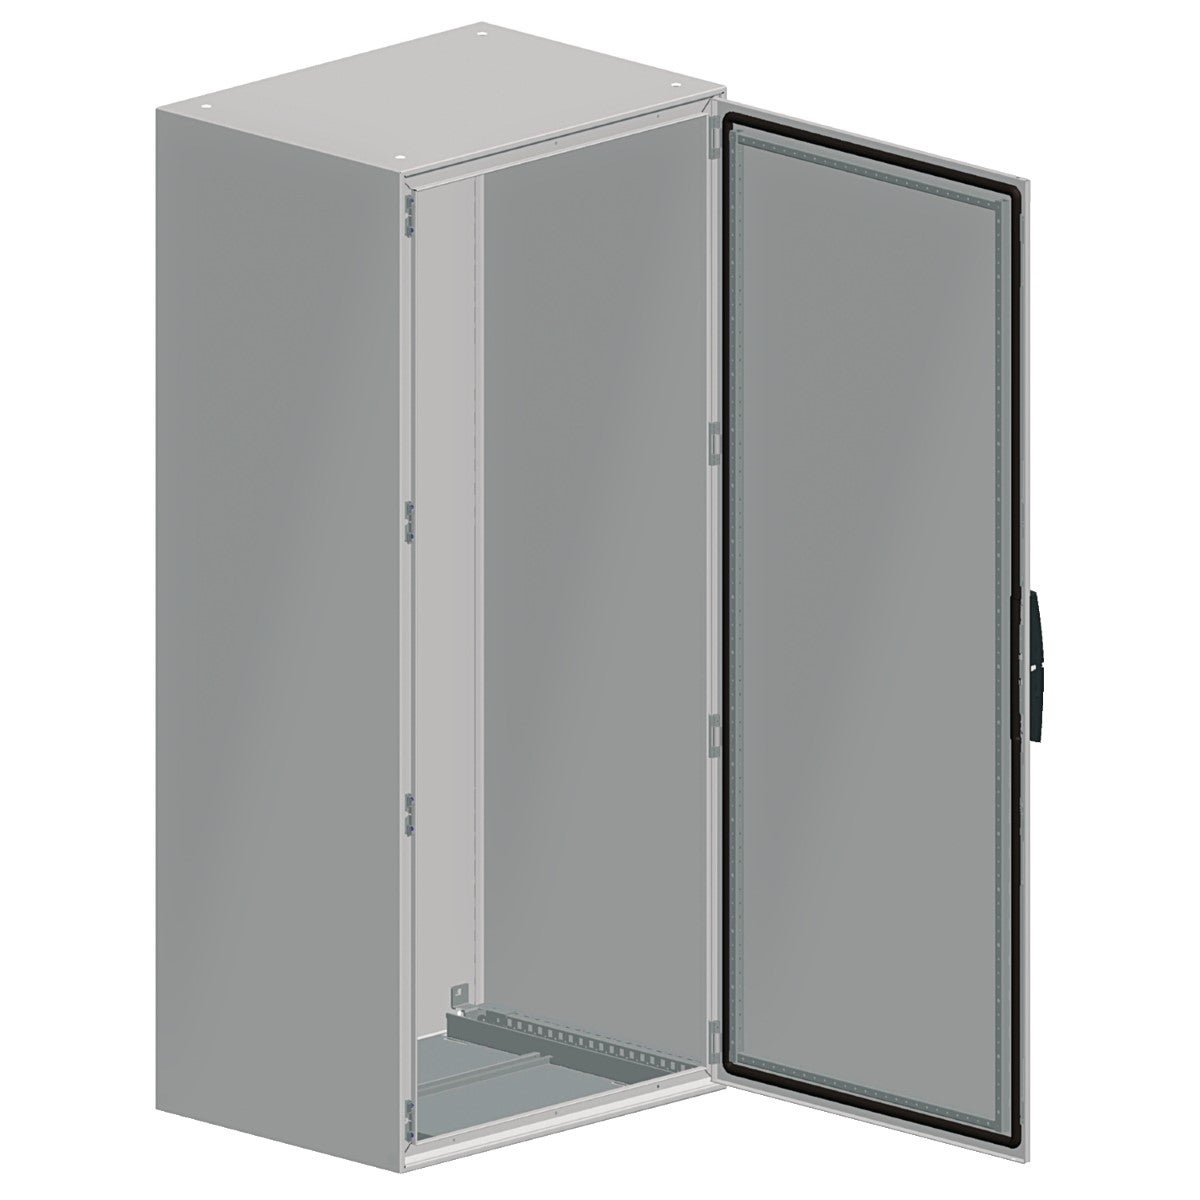 Spacial SM compact enclosure with mounting plate - 1400x800x300 mm